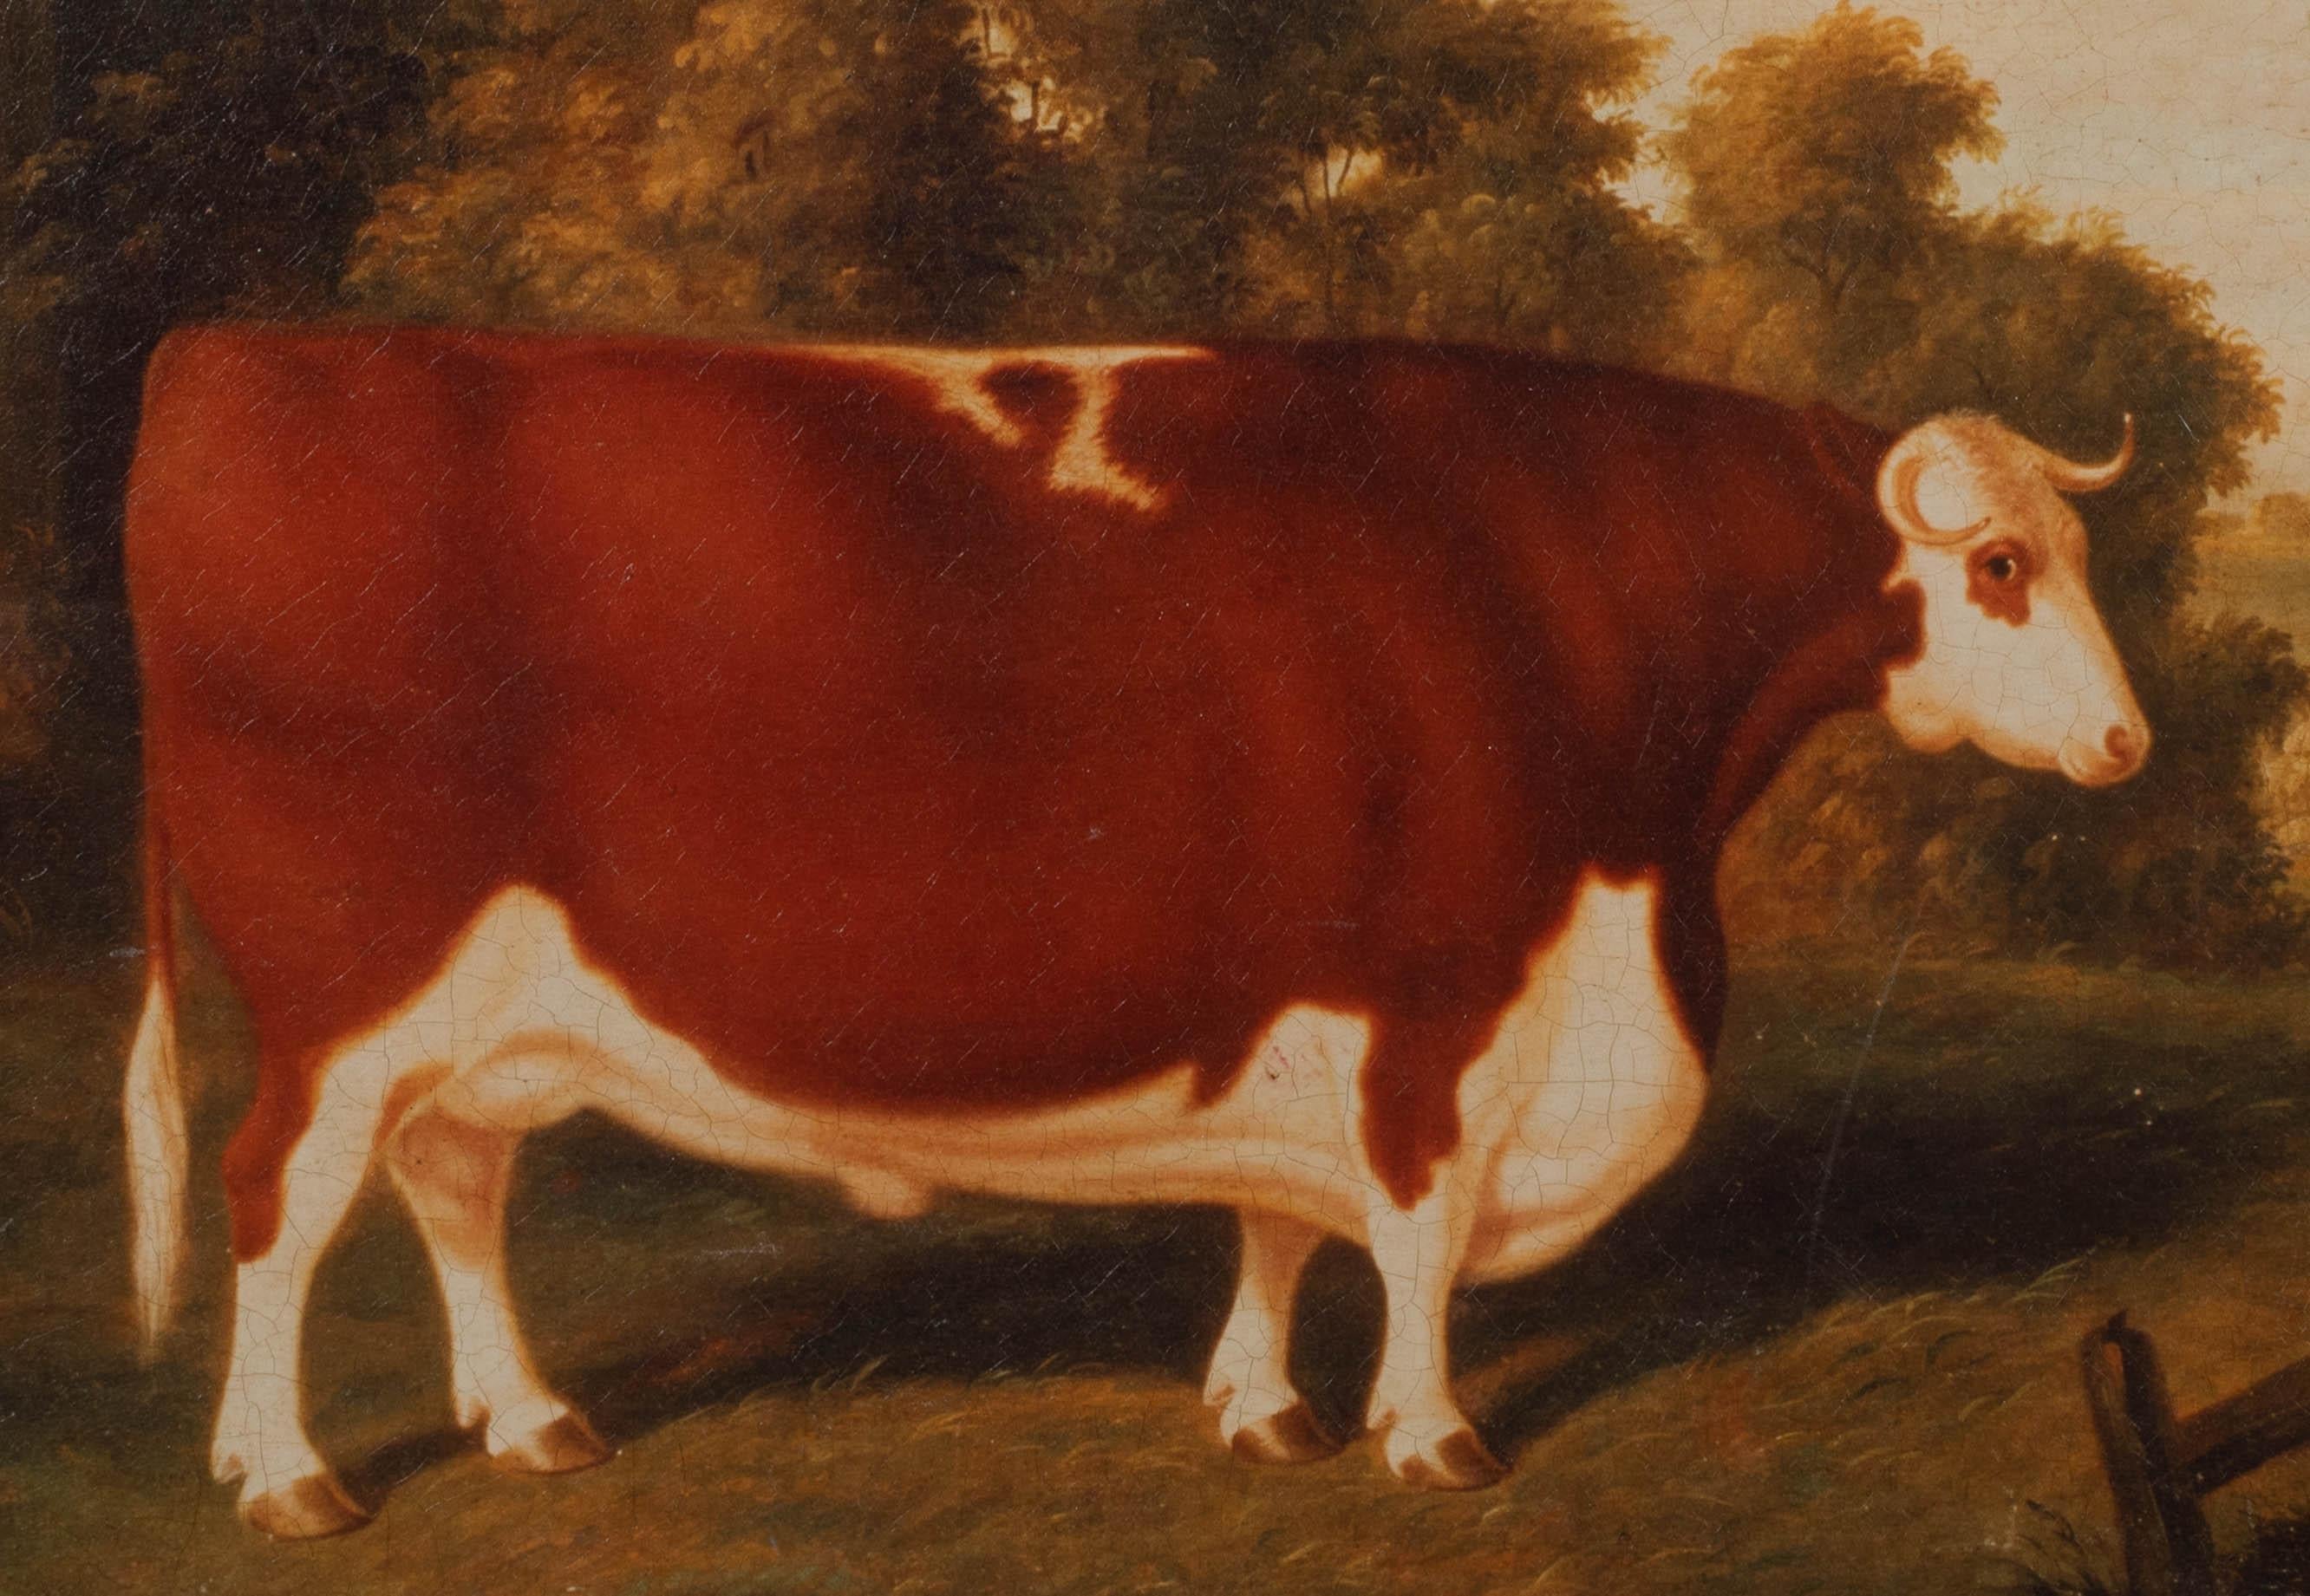 Portrait of A Prize Hereford Bull, 19th Century 

circle of Thomas WEAVER (1774-1843)

Large 19th Century English portrait of a prize Hereford Bull in an open landscape, oil on canvas. Excellent quality and condition portrait of the Bull painted